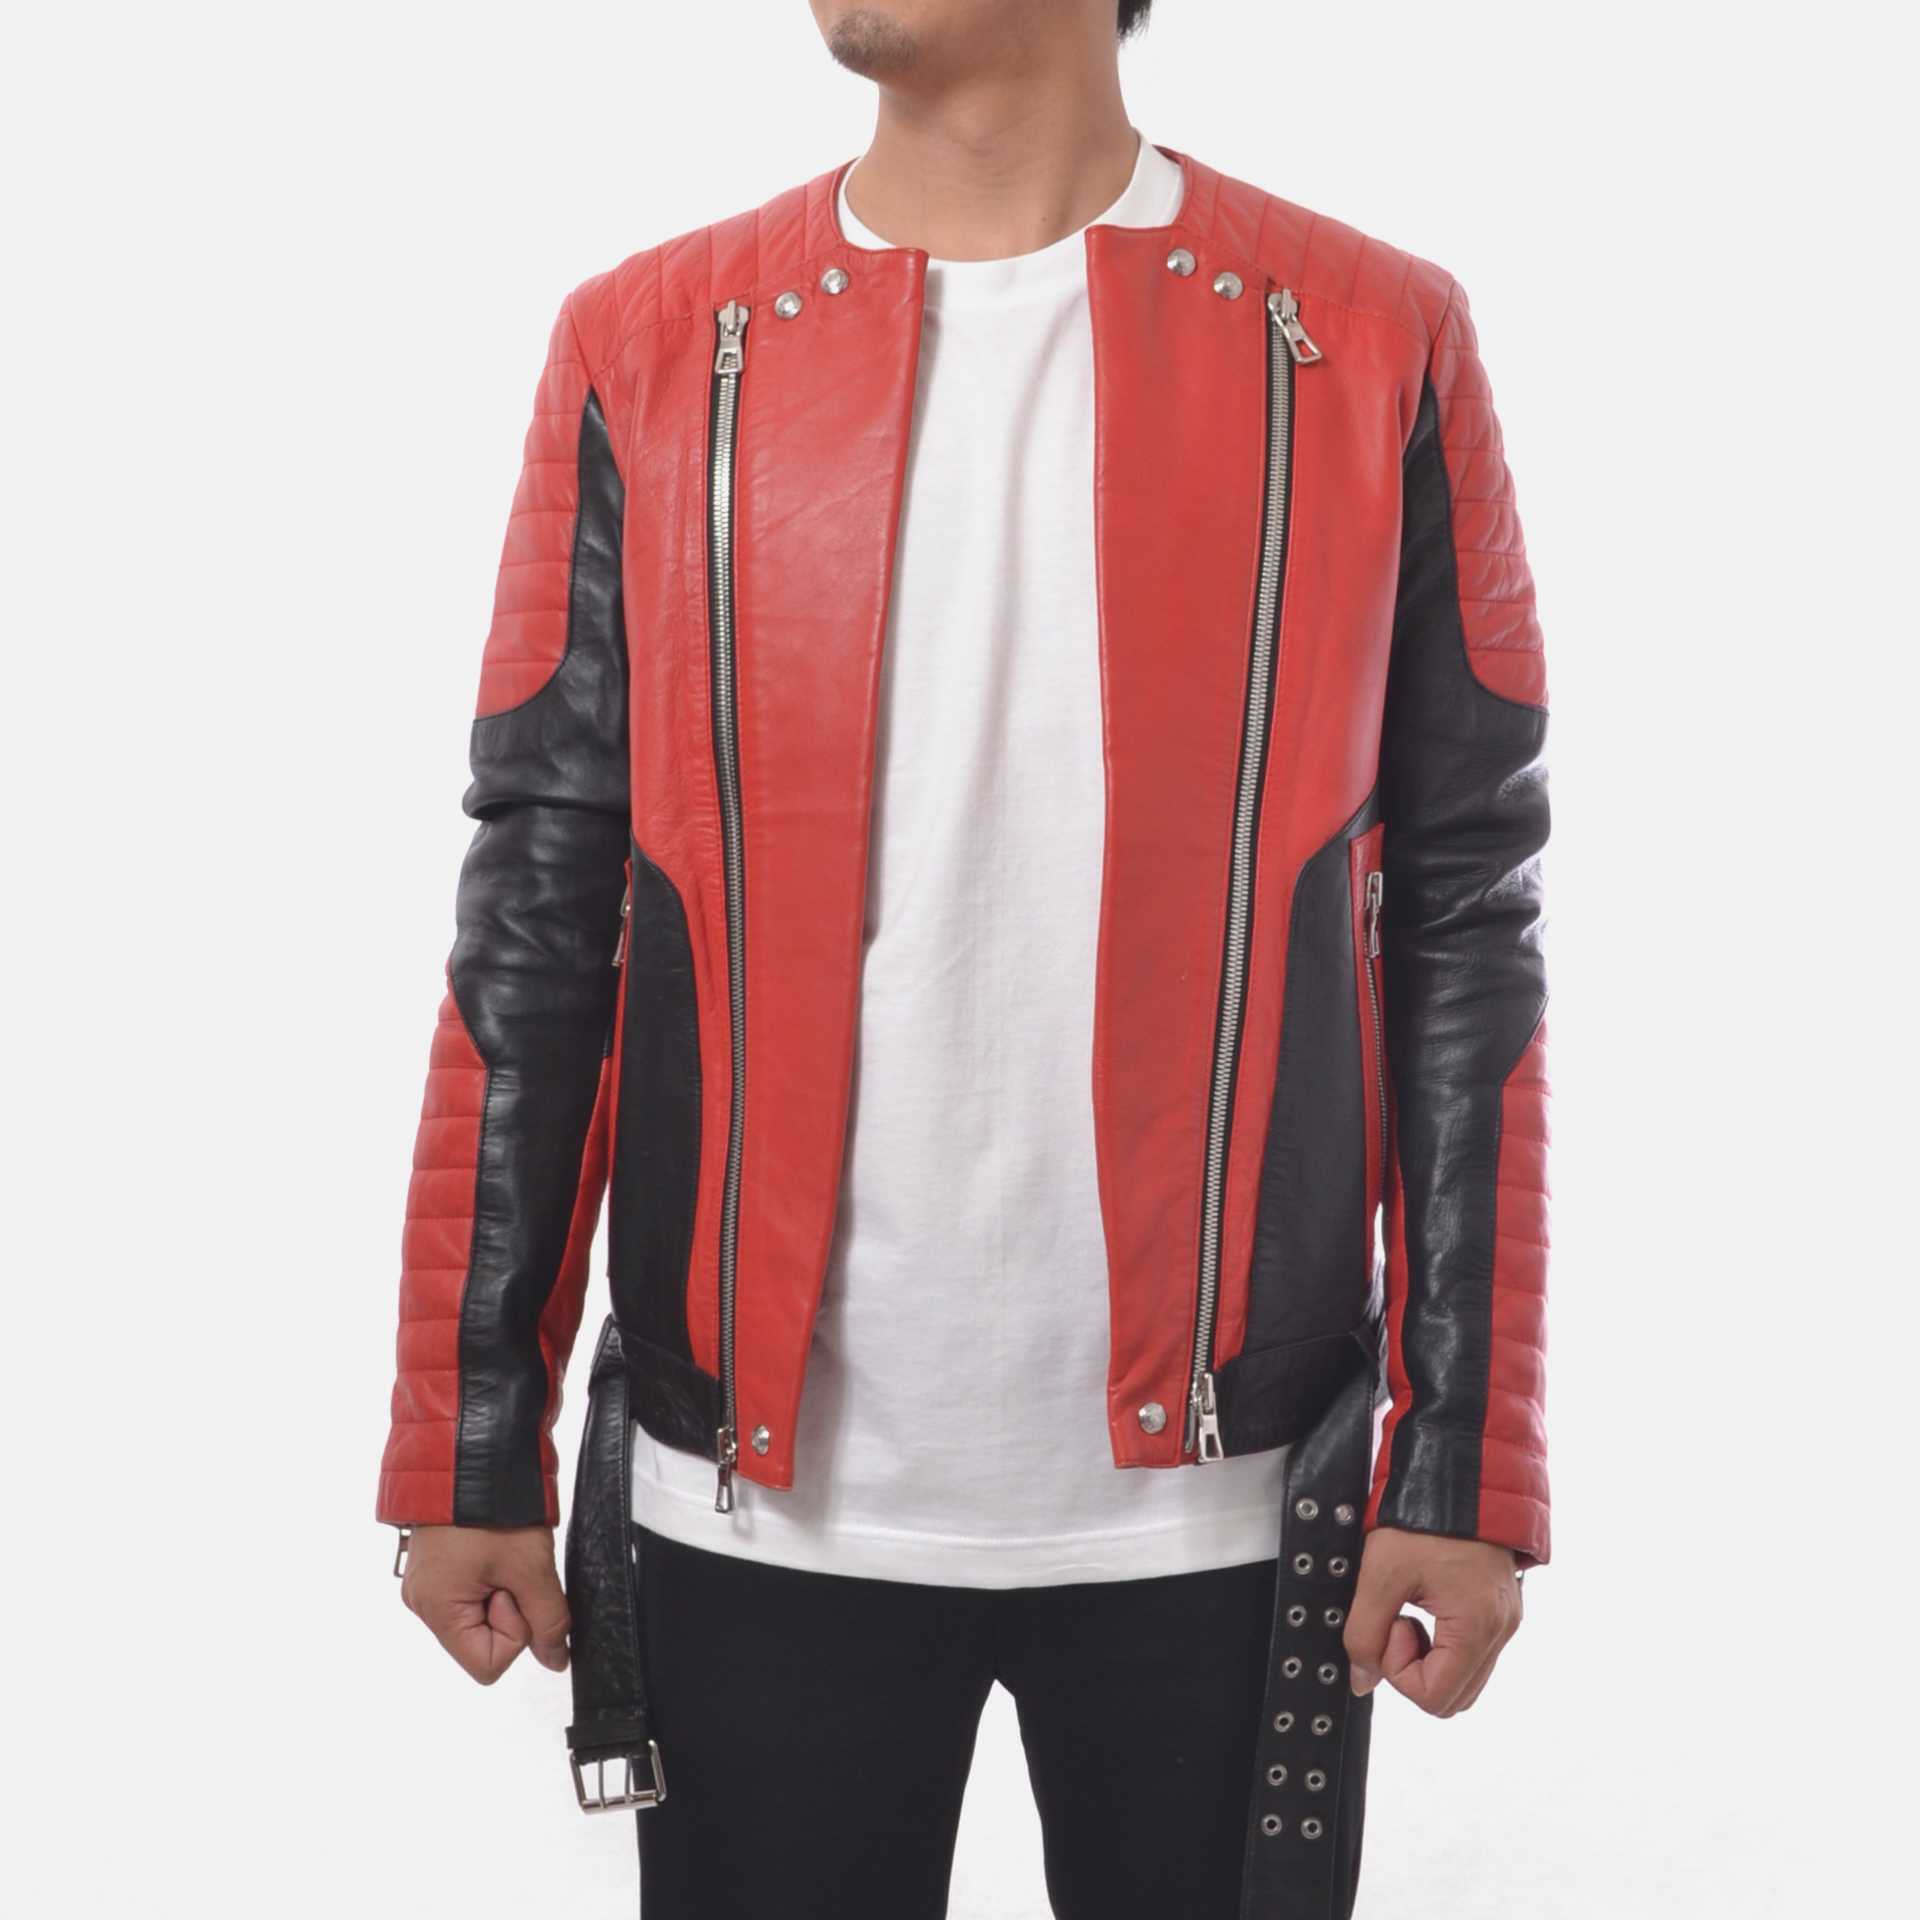 TWO-TONE RIDERS JACKET